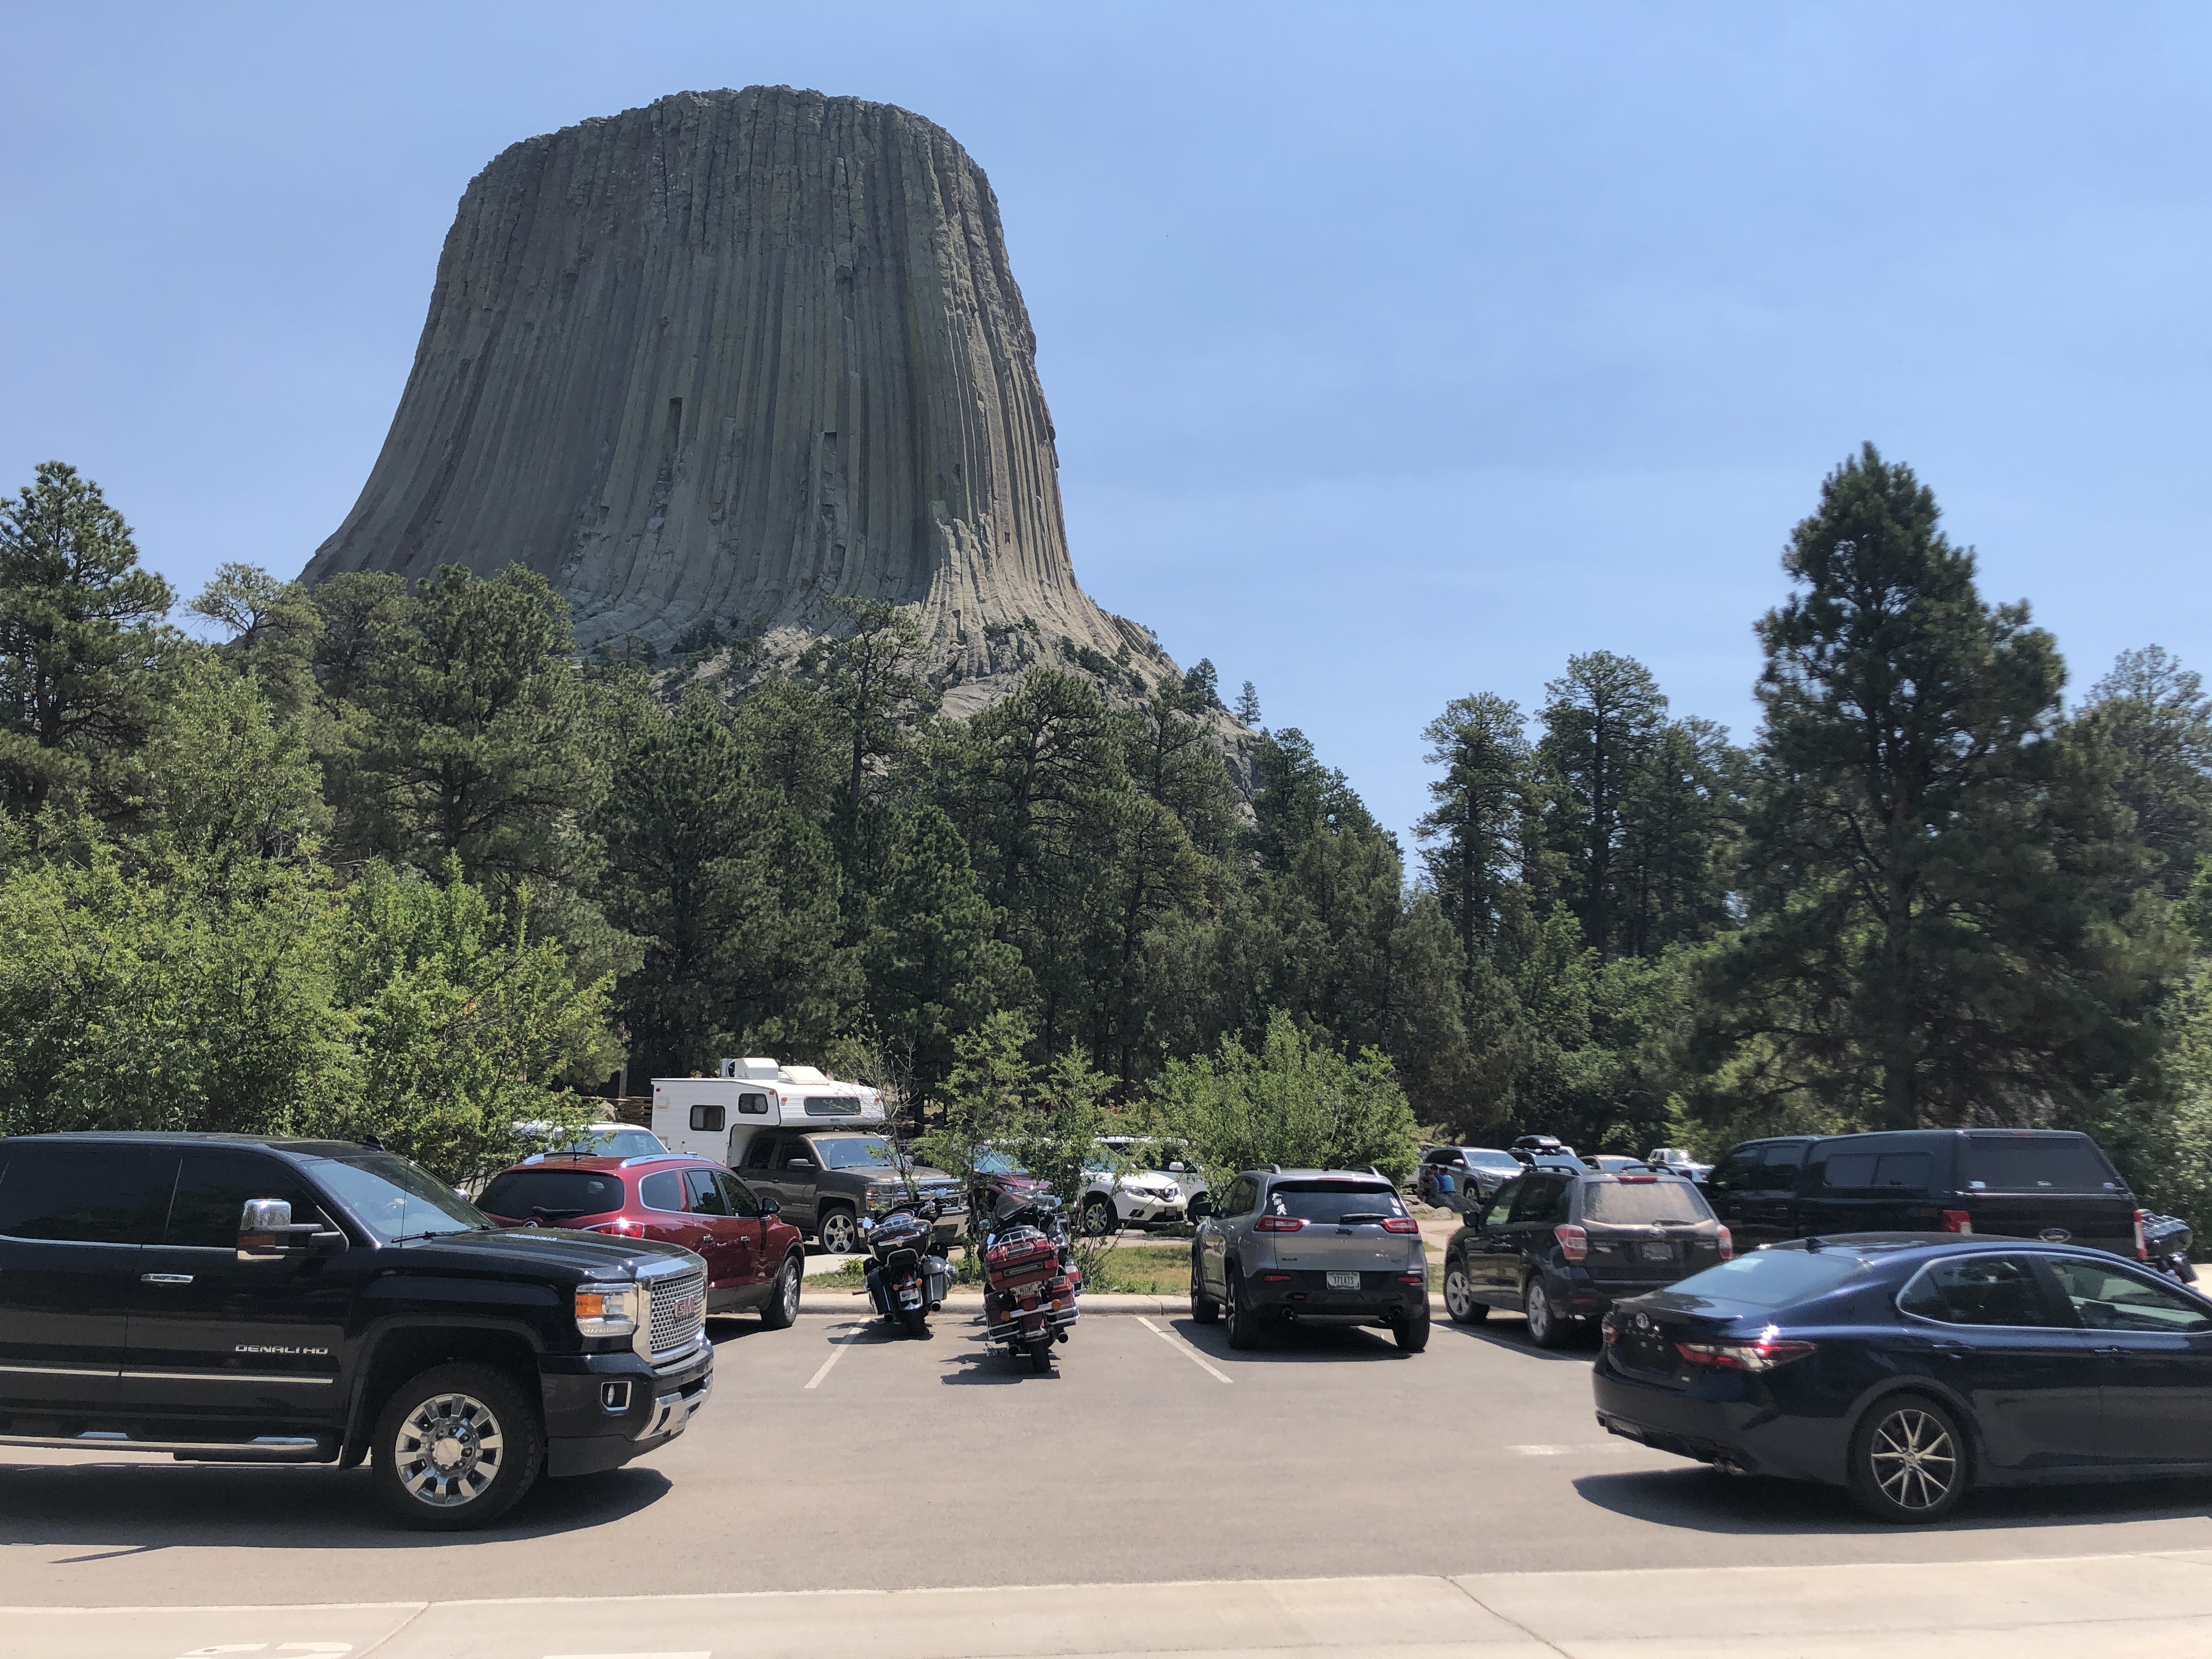 Vehicles in parking lot with Devils Tower in the background.